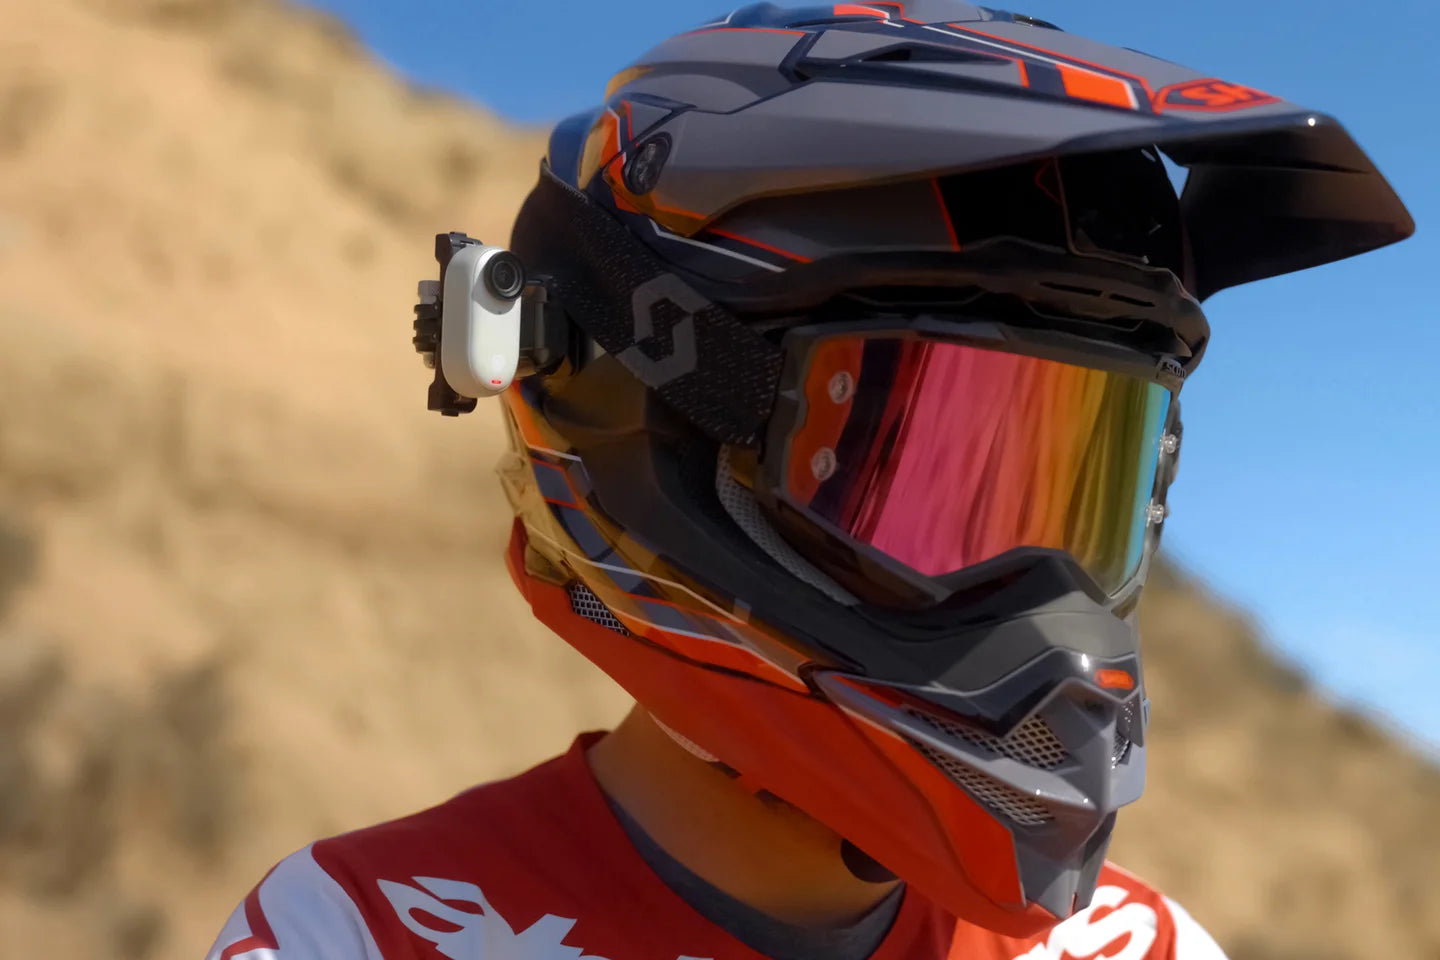 Capturing Motocross: Best Cameras and Mounting Options